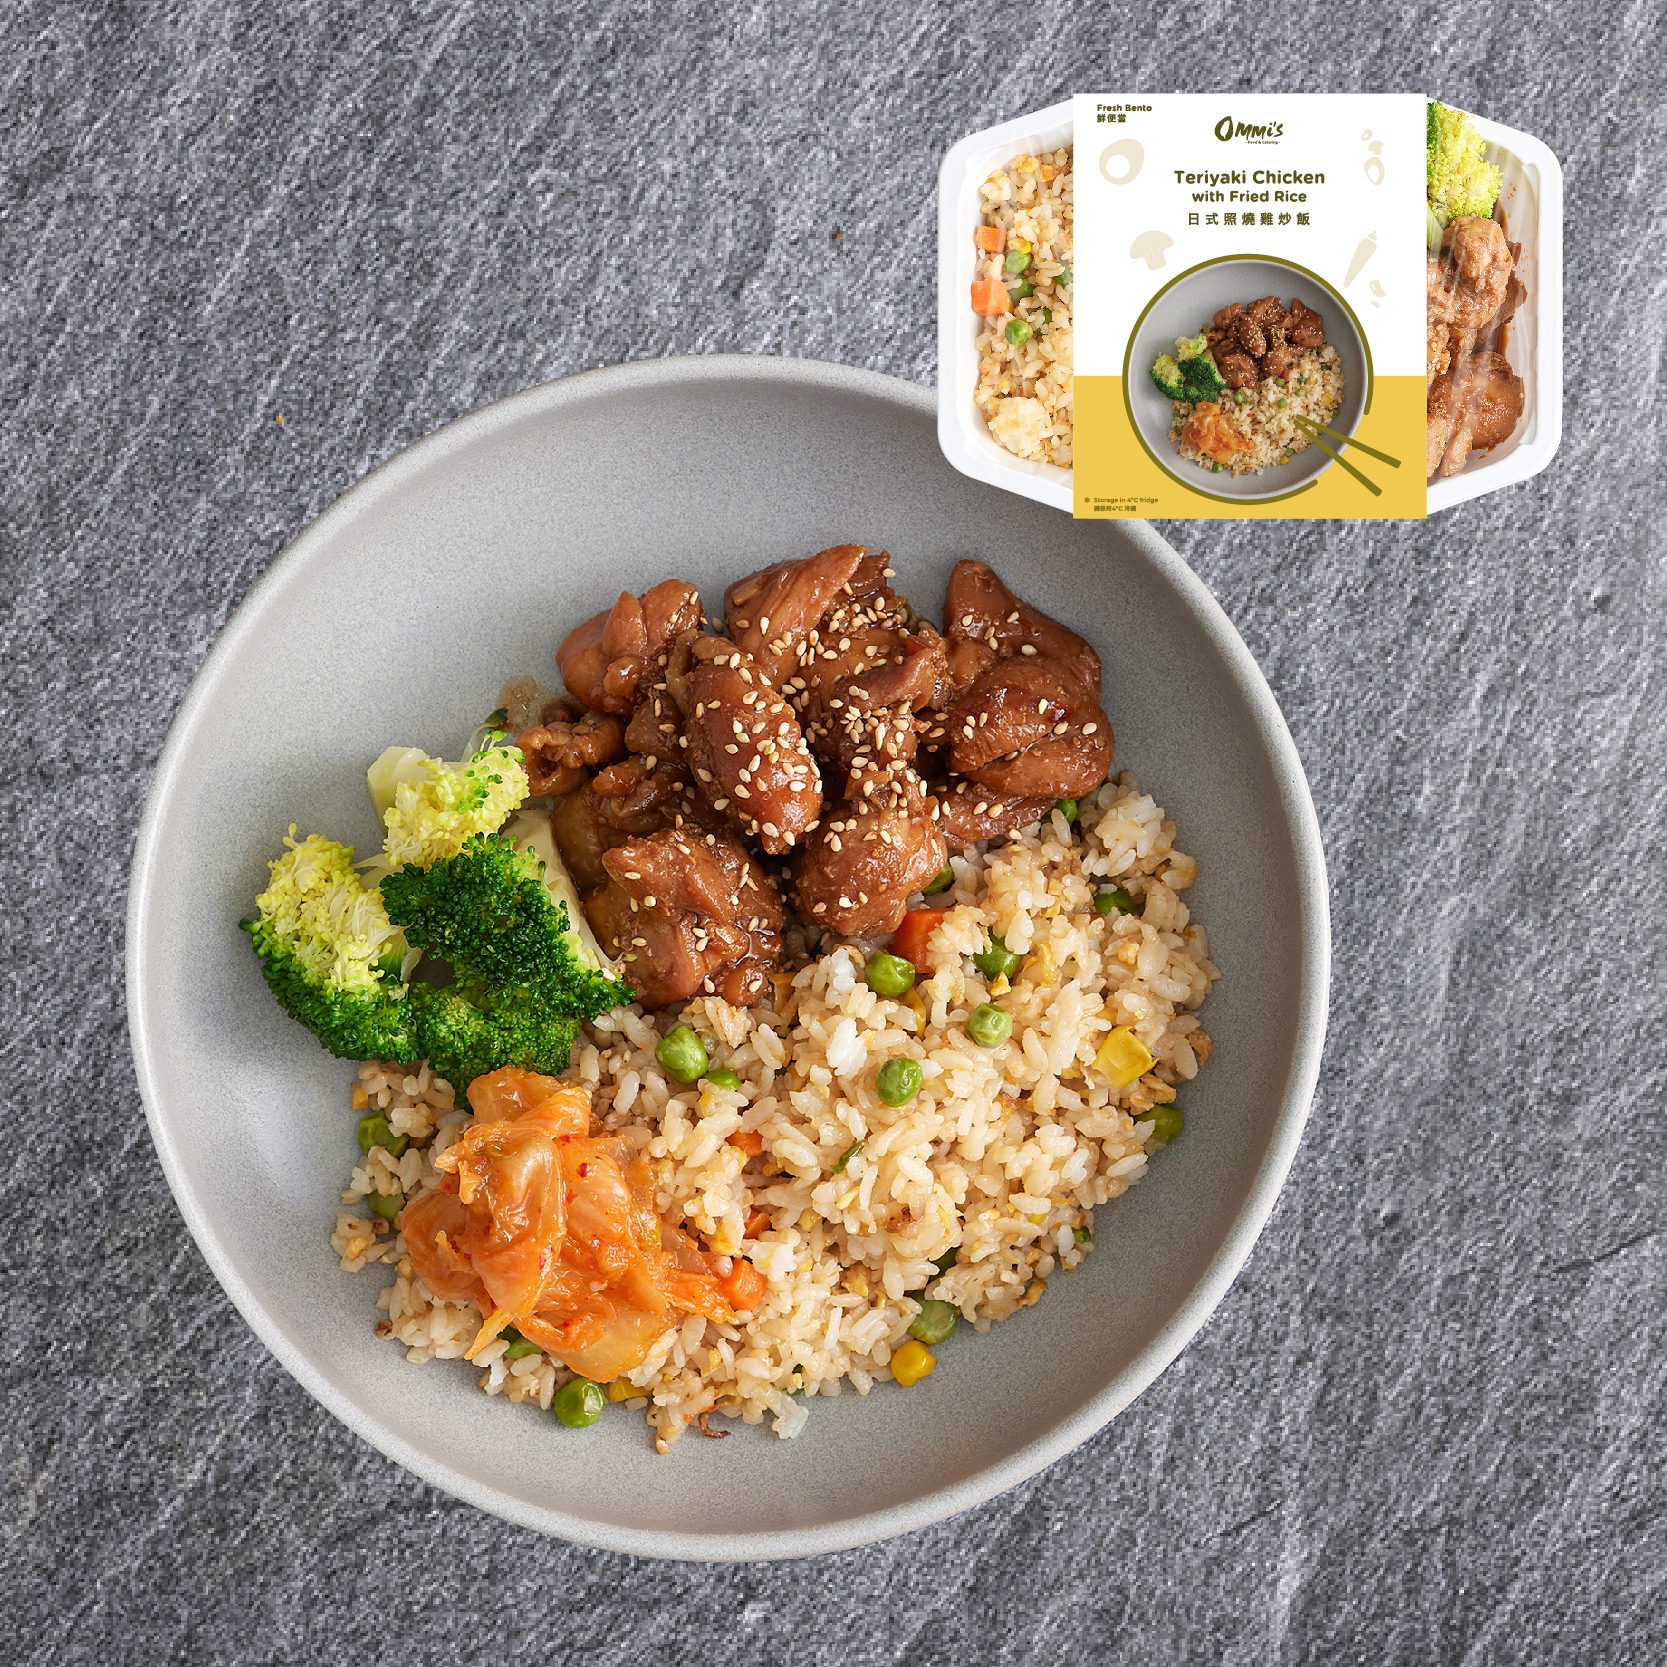 Ommi's  Teriyaki Chicken with Fried Rice 500g-eBest-Dishes & Set Meal,Ready Meal